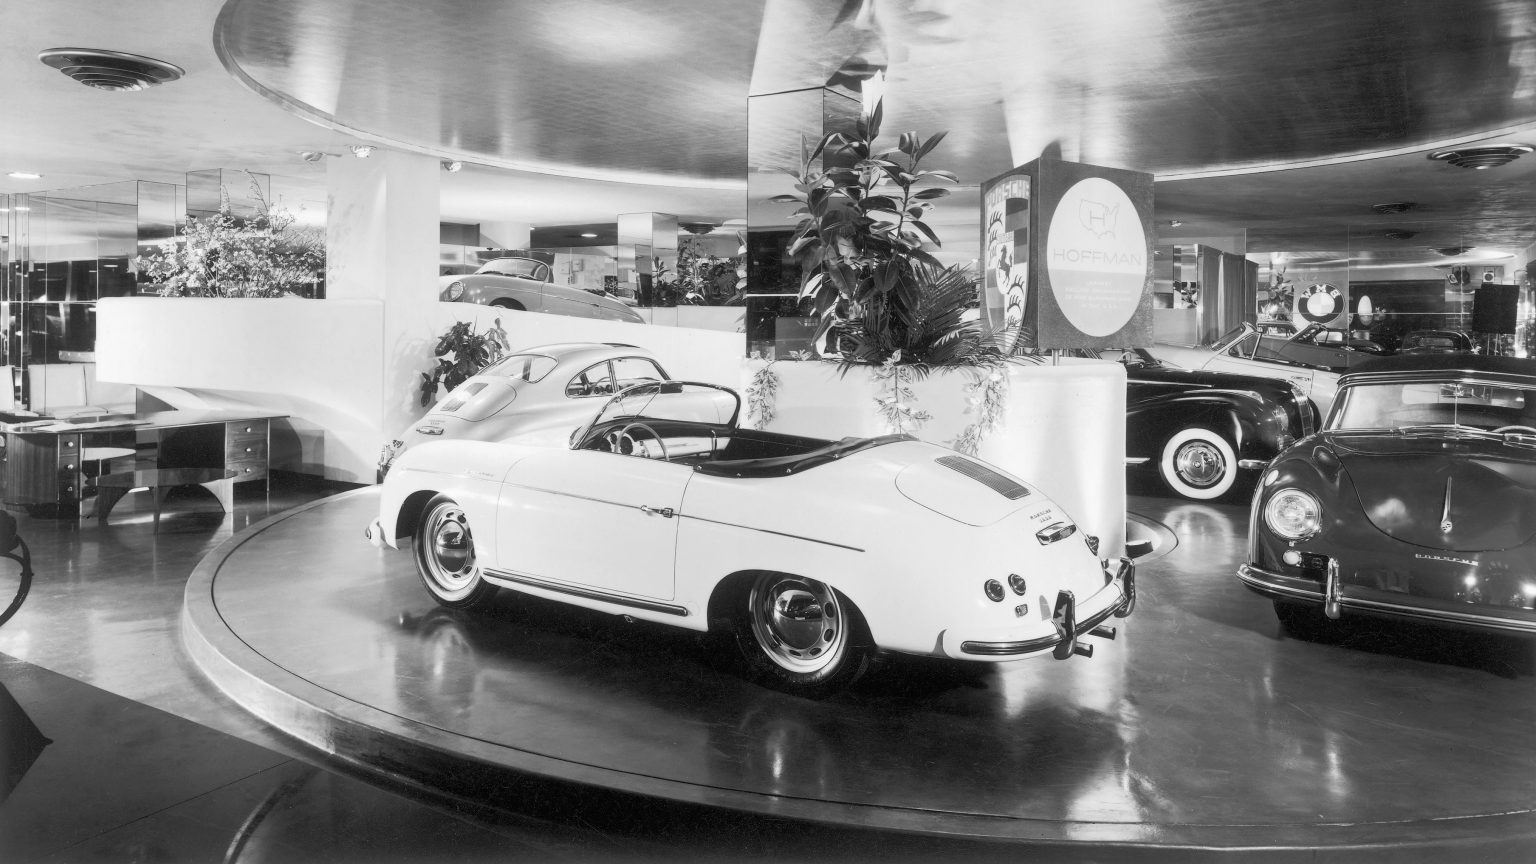 The showroom at Hoffman Motor Car Company on Park Avenue in New York City with Porsche 356 models on display in coupé, cabriolet and Speedster variants (1954/1955)